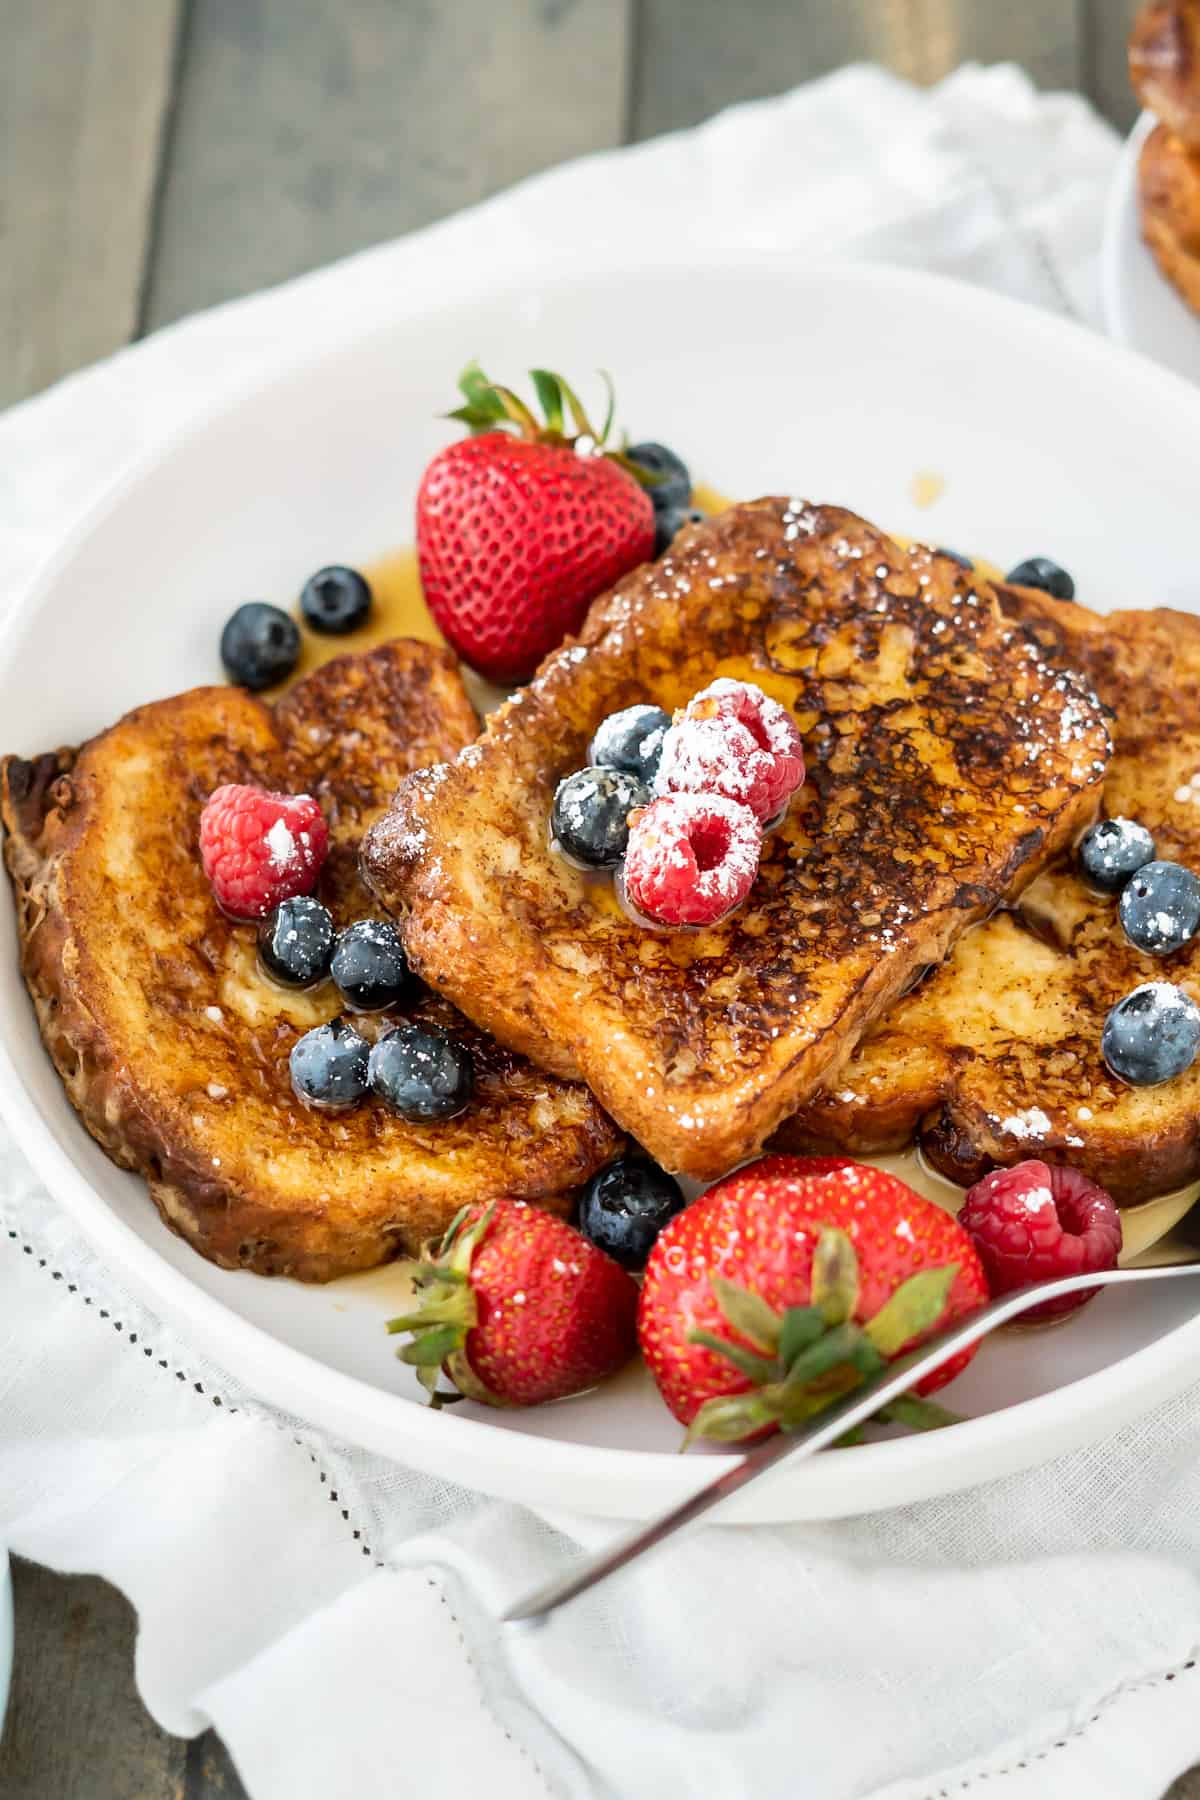 A stack of three pieces of french toast with fresh berries, powdered sugar, and maple syrup.